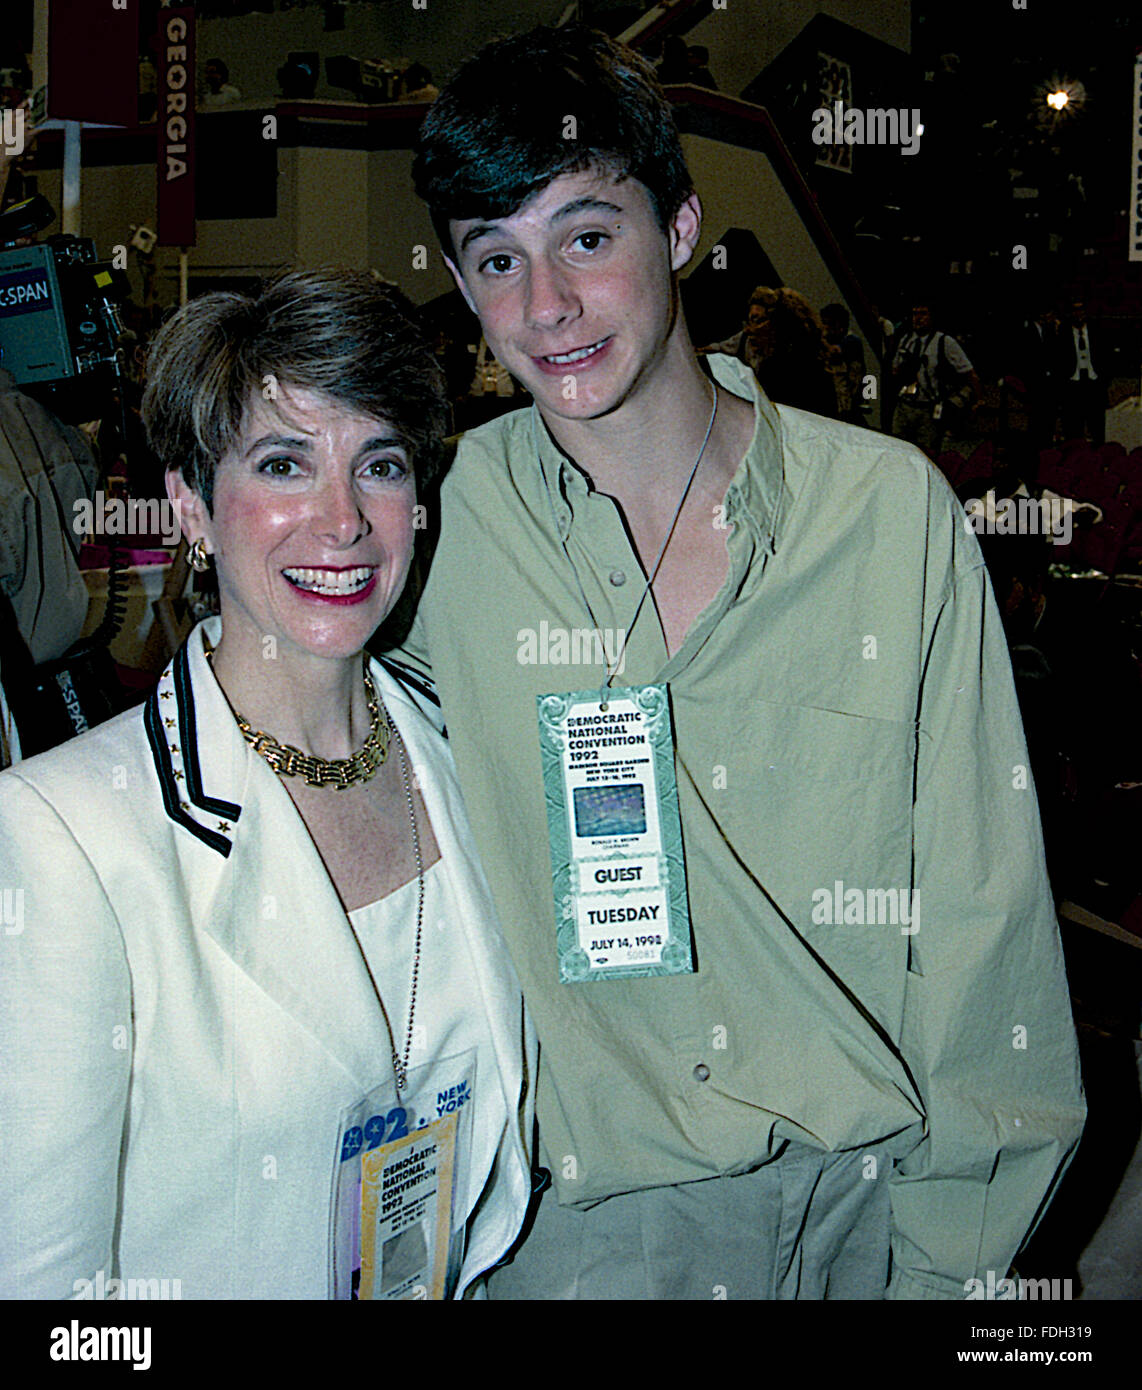 New York, NY., USA, 14th July,1992 Congresswoman Marjorie Margolies-Mezvinsky (D-PA) and her son Marc Mezvinsky (15 years old)  pose together while walking the floor of the Democratic National Convention in Madison Square Garden. Marjorie Margolies, is a former journalist and a Democratic politician. From 1993 to 1995, she was a member of the U.S. House of Representatives, representing Pennsylvania. Her son, Marc Mezvinsky, married Chelsea Clinton, the daughter of former U.S. President Bill Clinton and former U.S. Secretary of State Hillary Rodham Clinton  Credit: Mark Reinstein Stock Photo